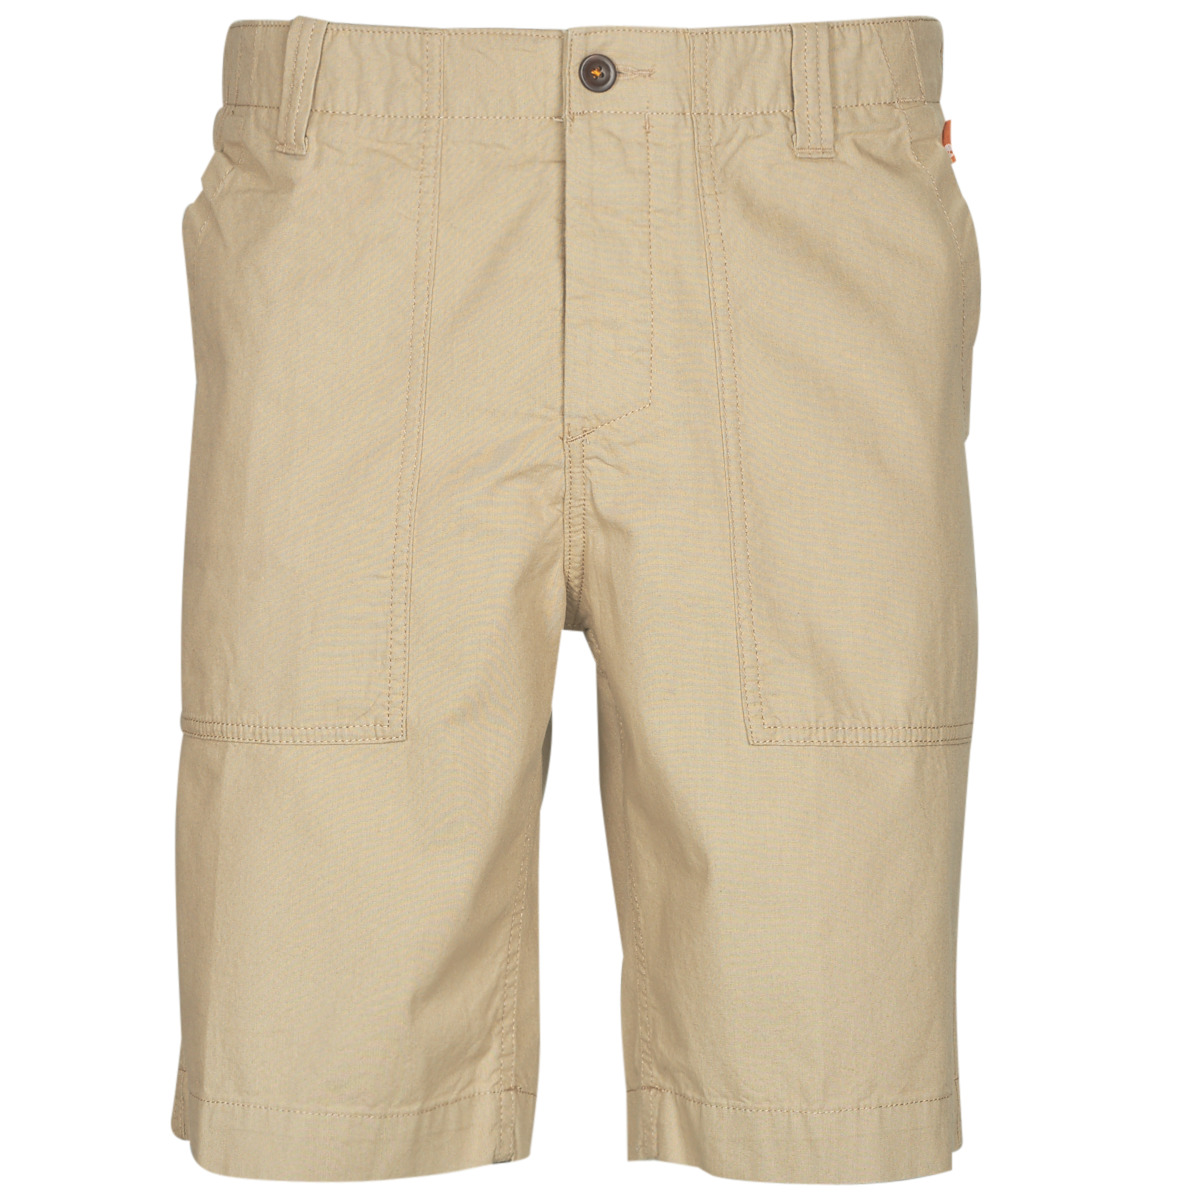 Timberland Beige WORK FOR THE FUTURE - ROC FATIGUE SHORT STRAIGHT uWxvwxY4